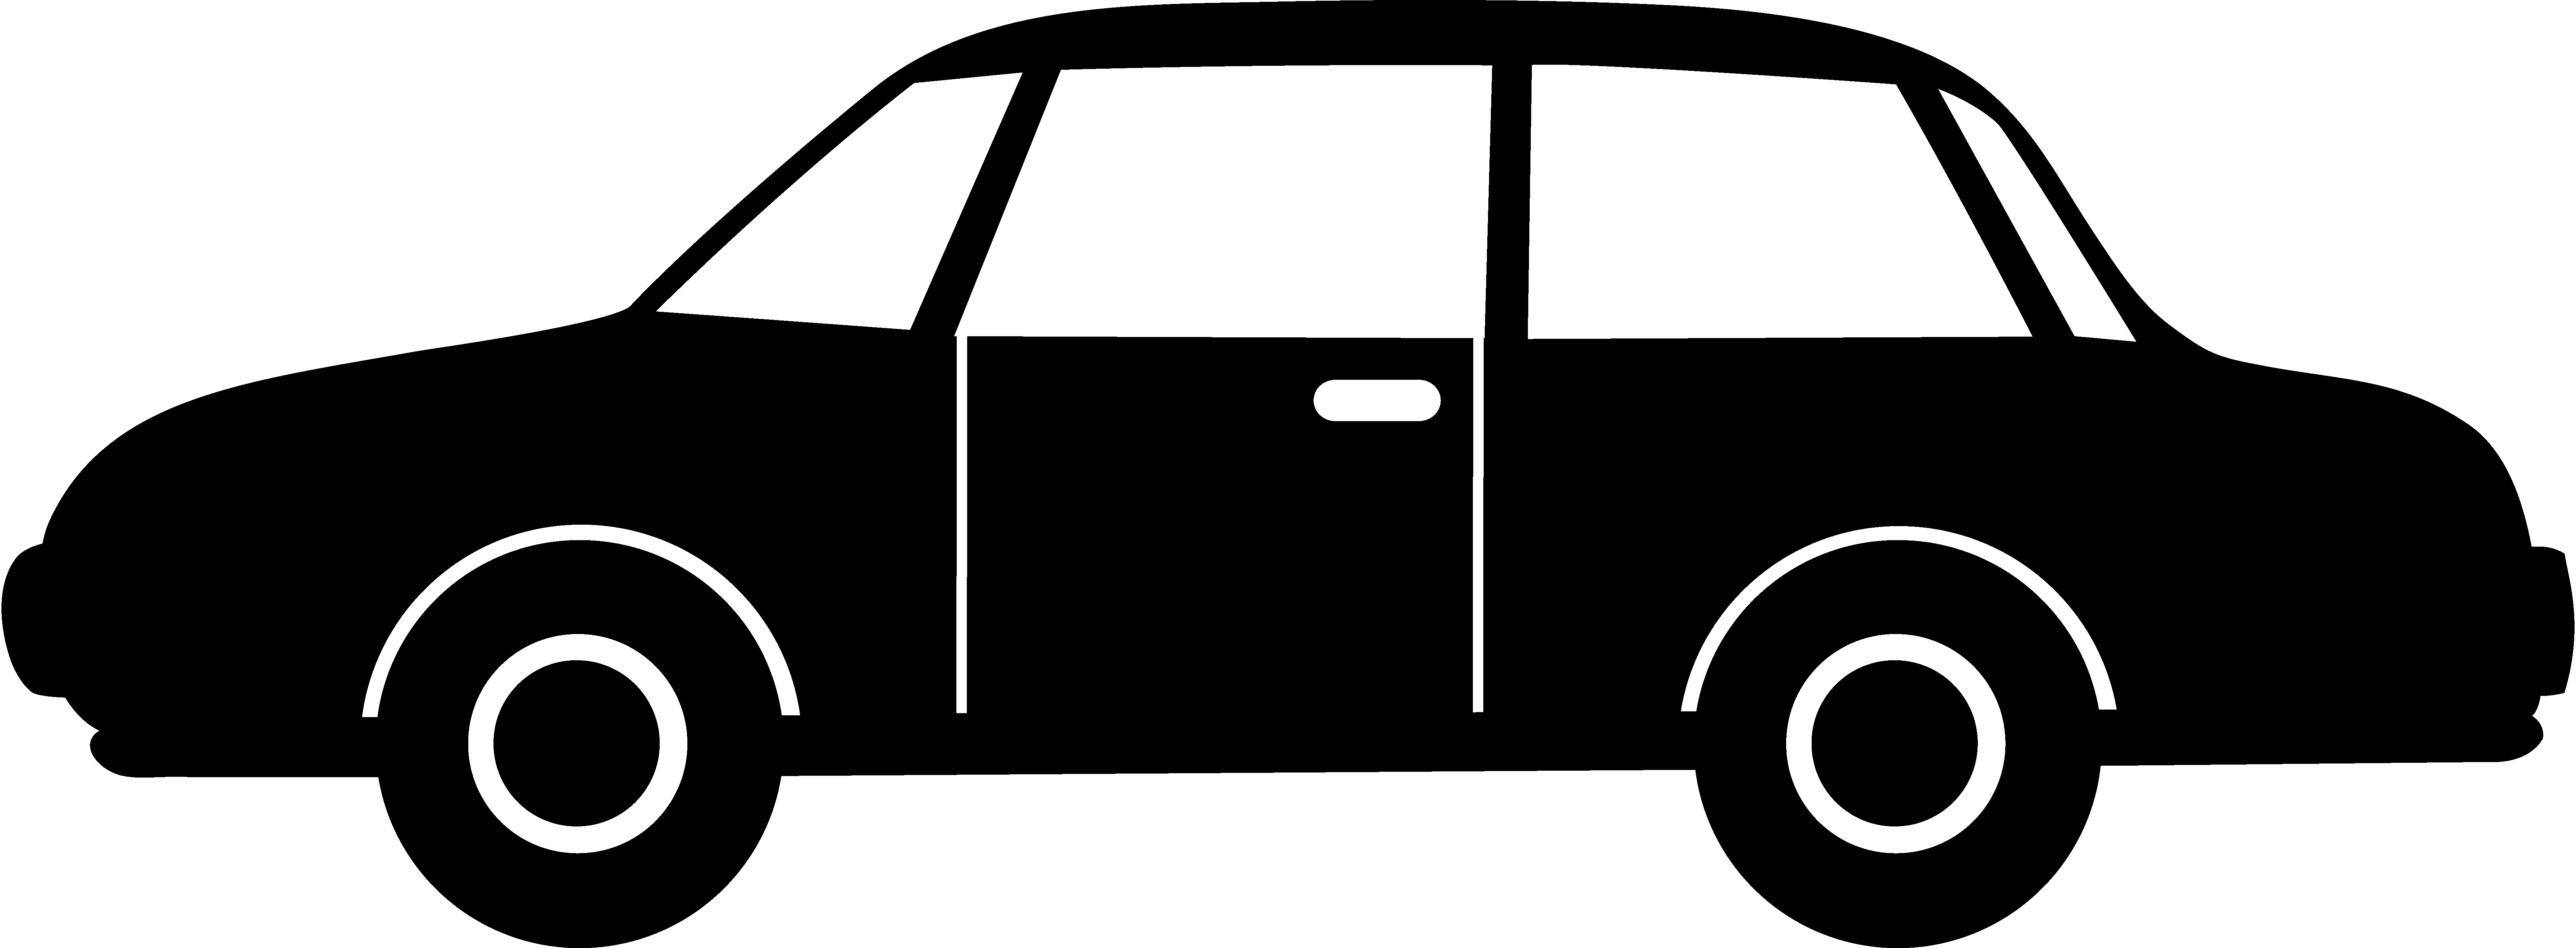 Car clipart black and white